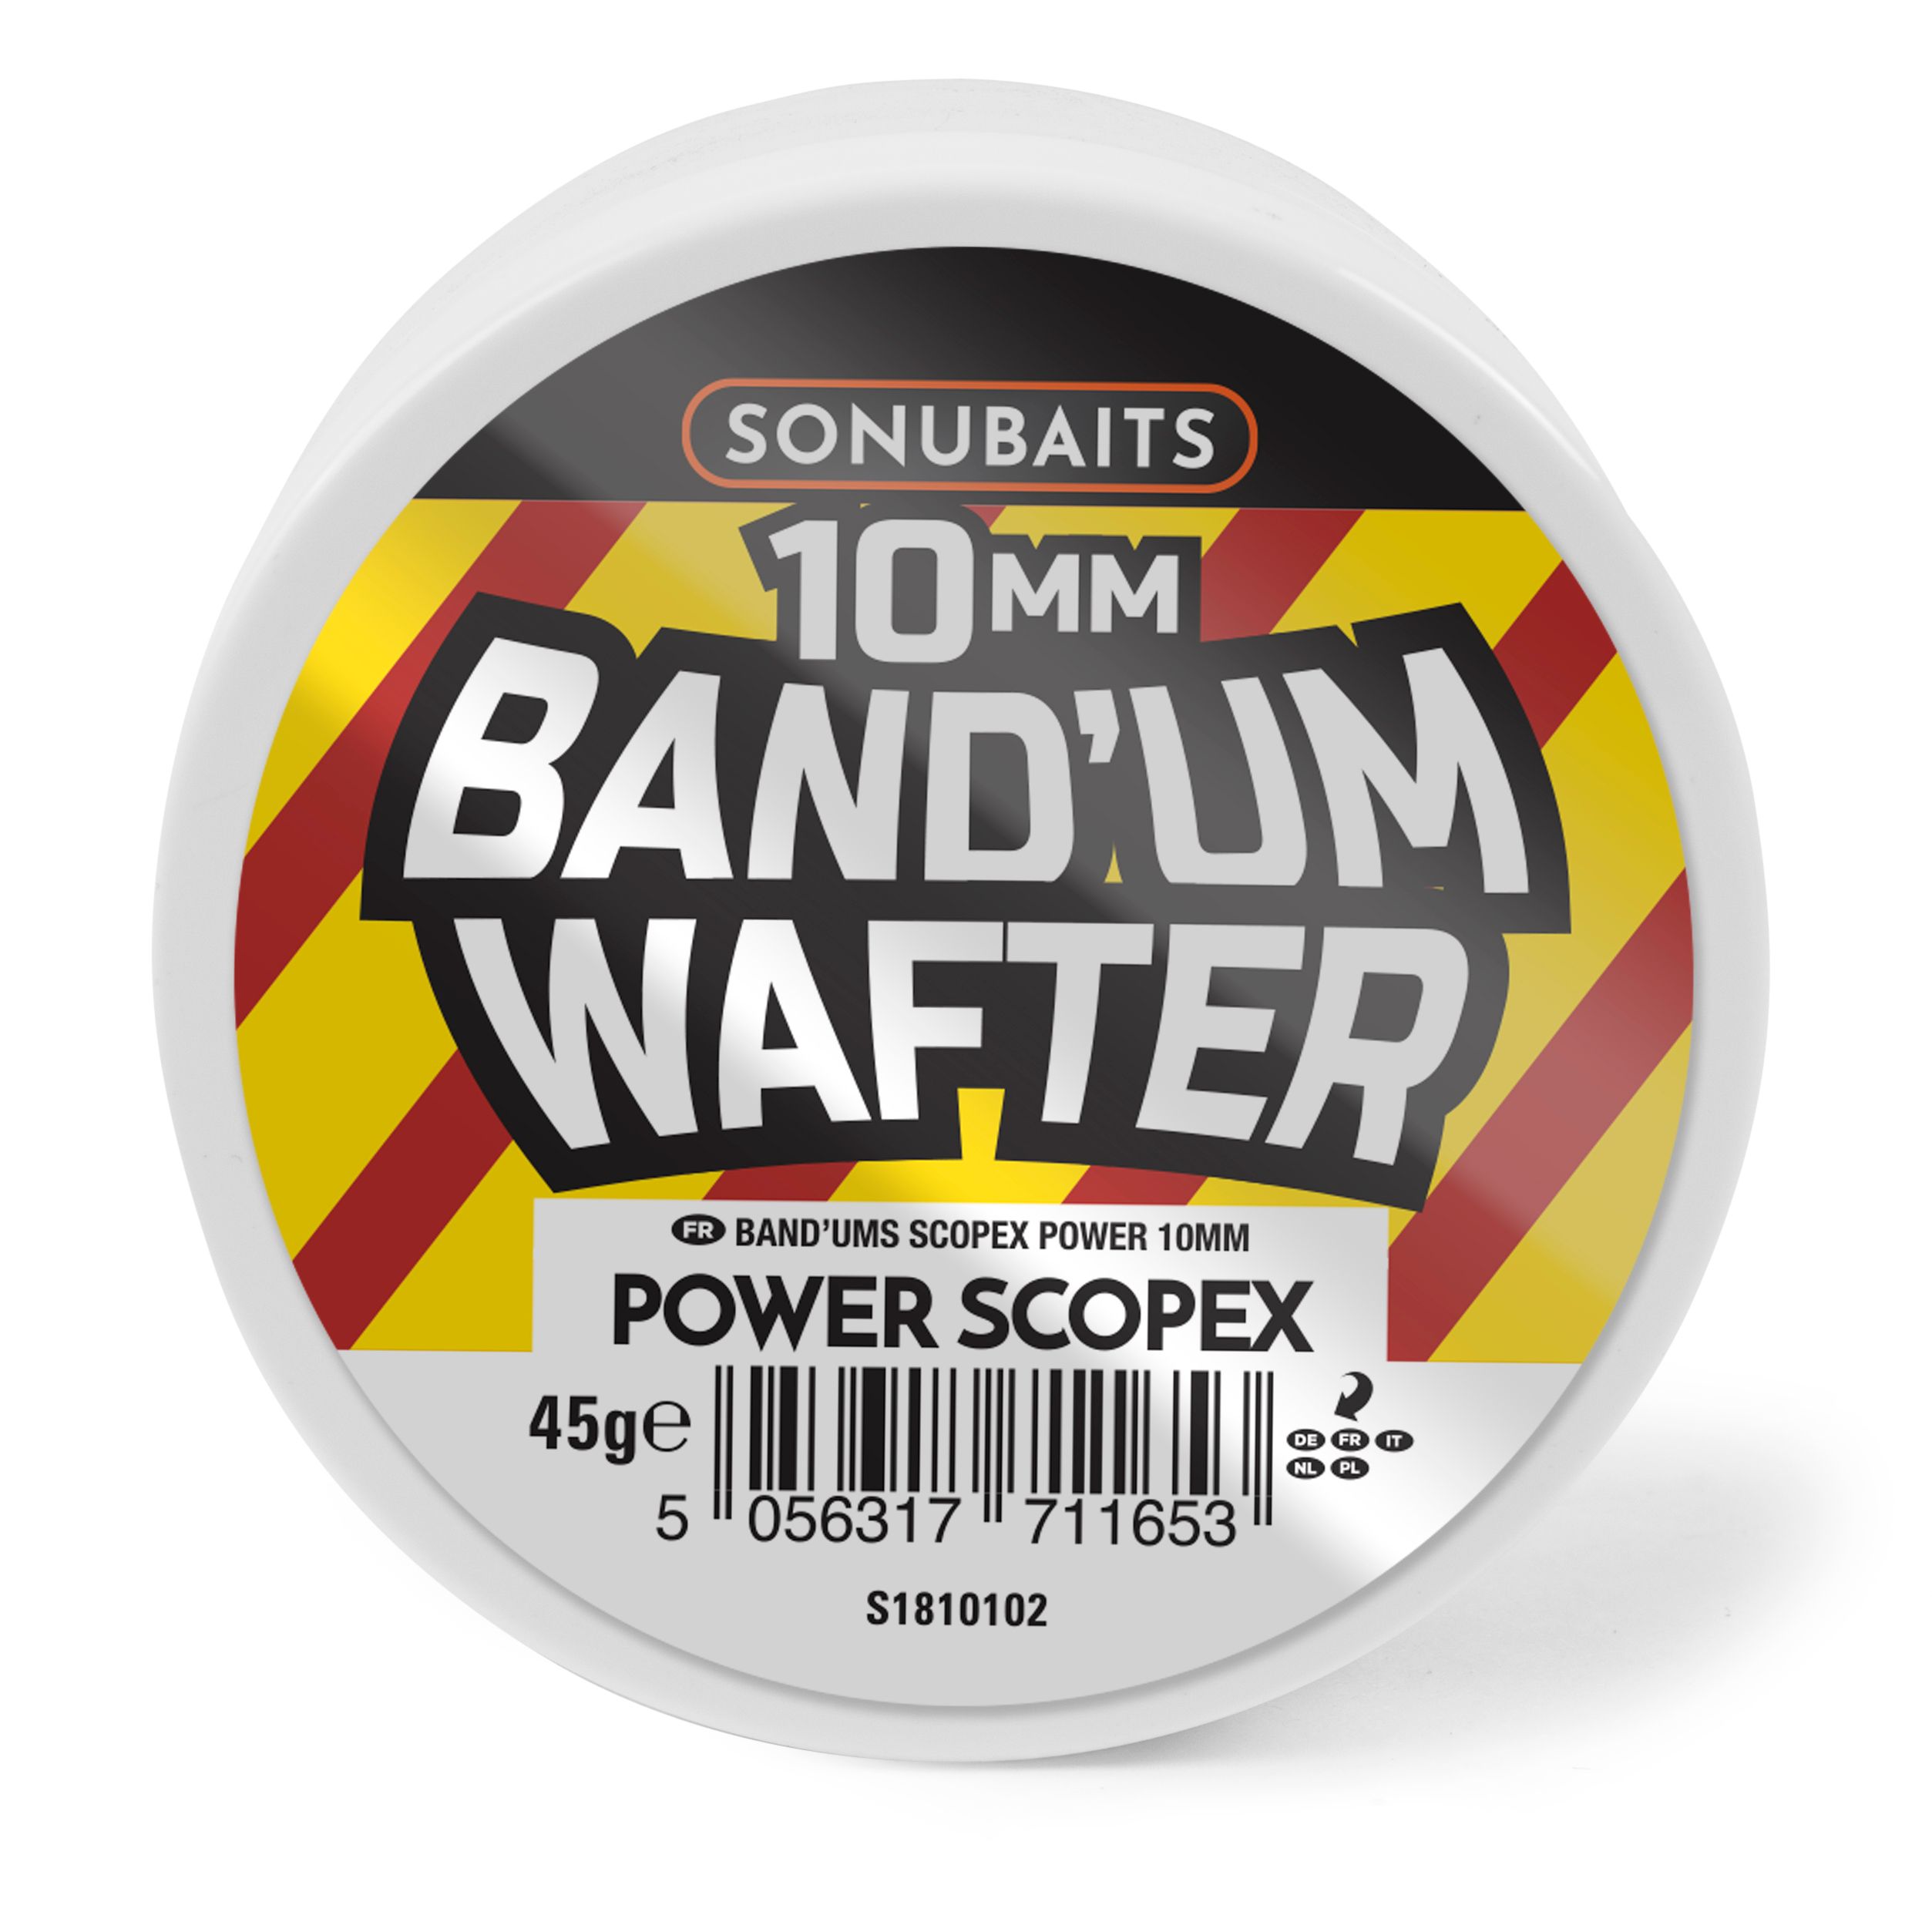 Sonubaits Band'um Wafters 10mm - Power Scopex